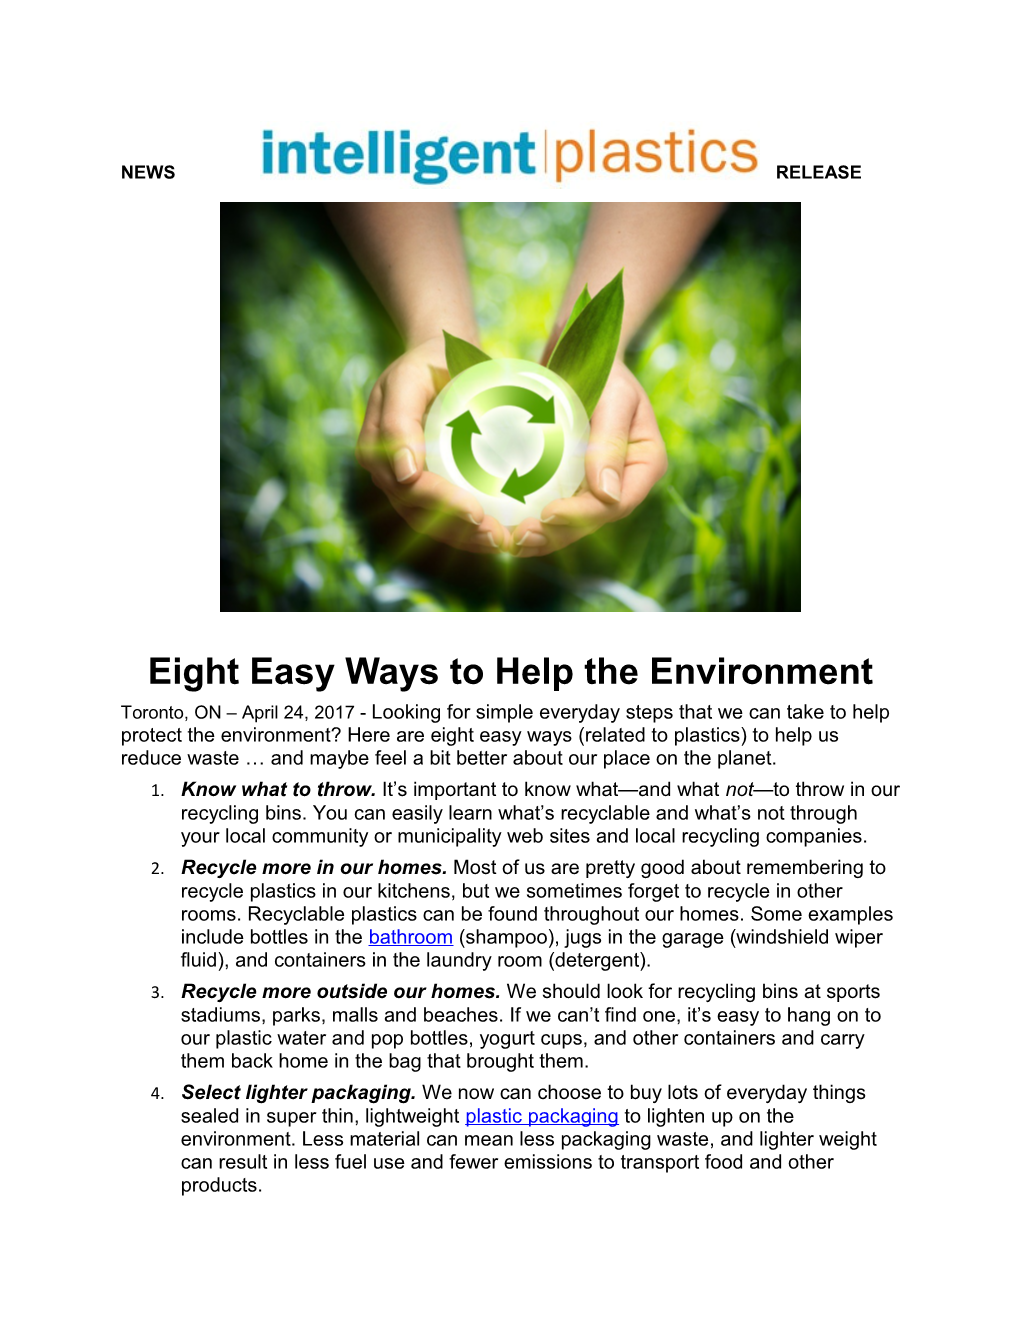 Eight Easy Ways to Help the Environment